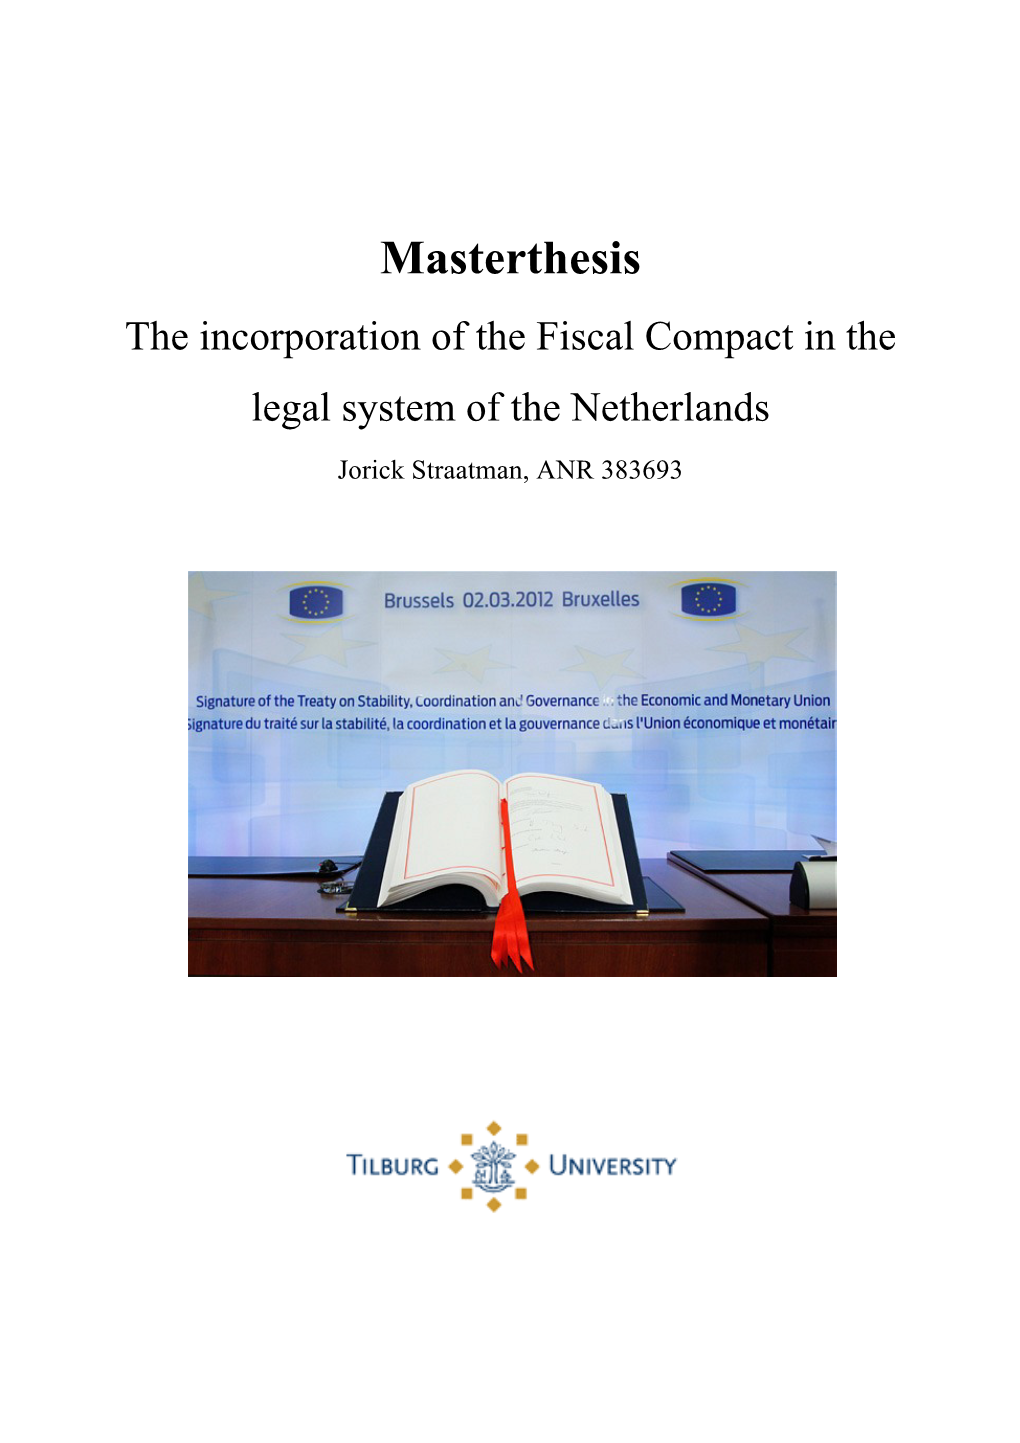 Masterthesis the Incorporation of the Fiscal Compact in the Legal System of the Netherlands